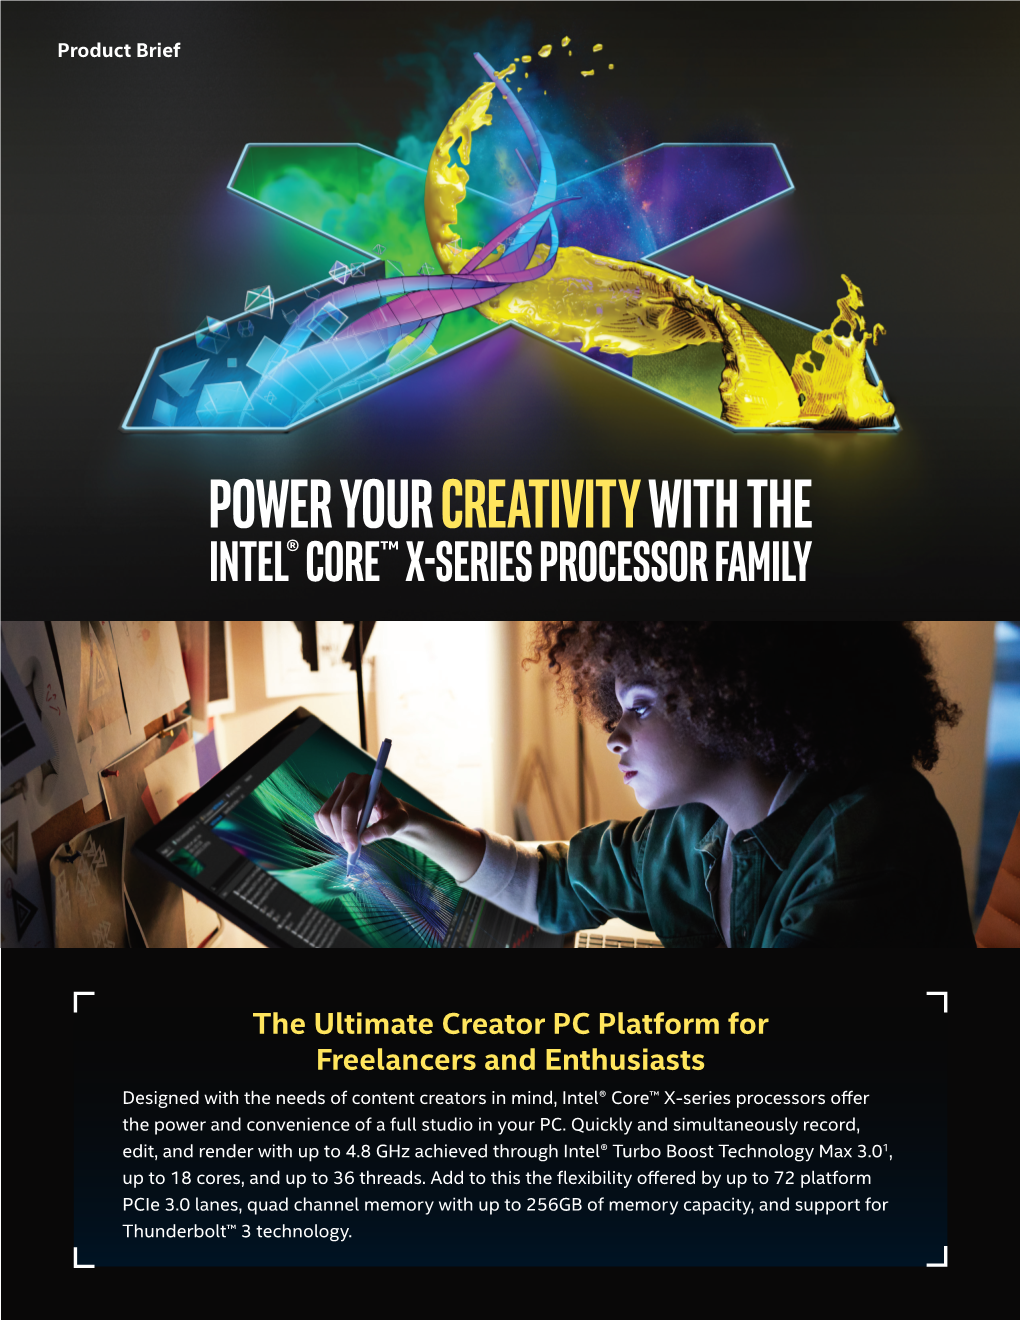 Power Your Creativity with the Intel® Core™ X-Series Processor Family